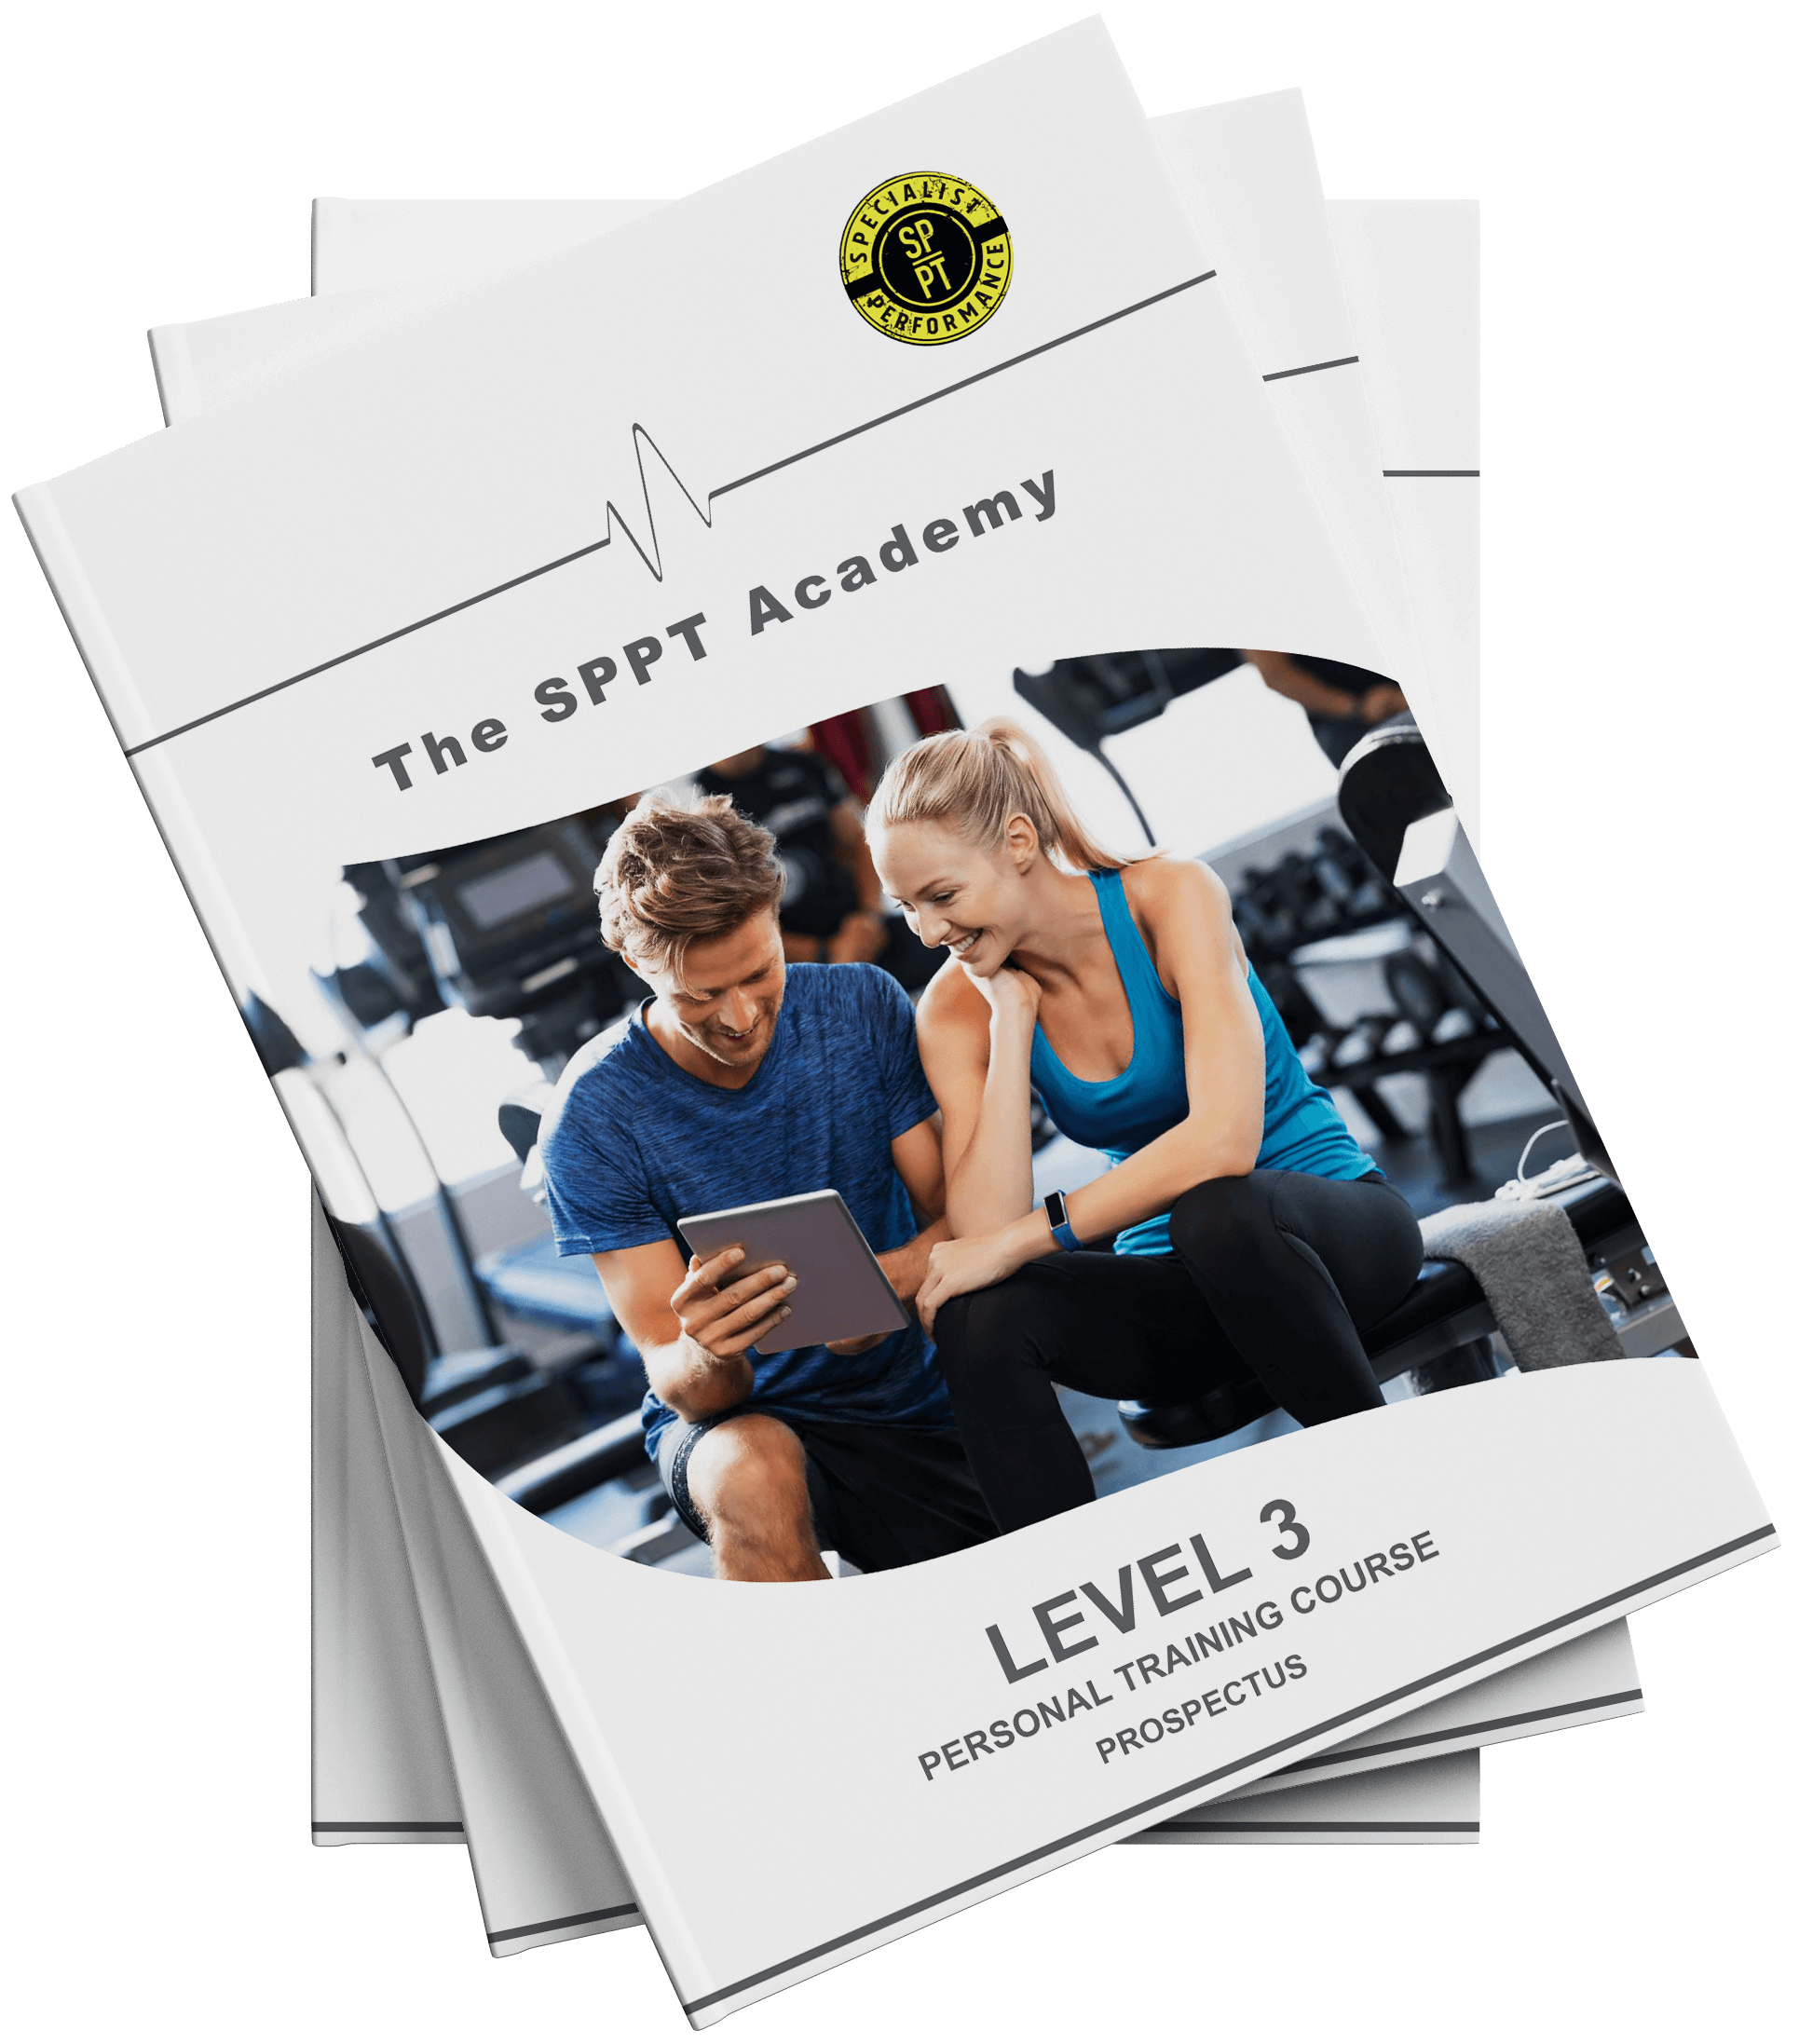 Level 3 Personal Training Course